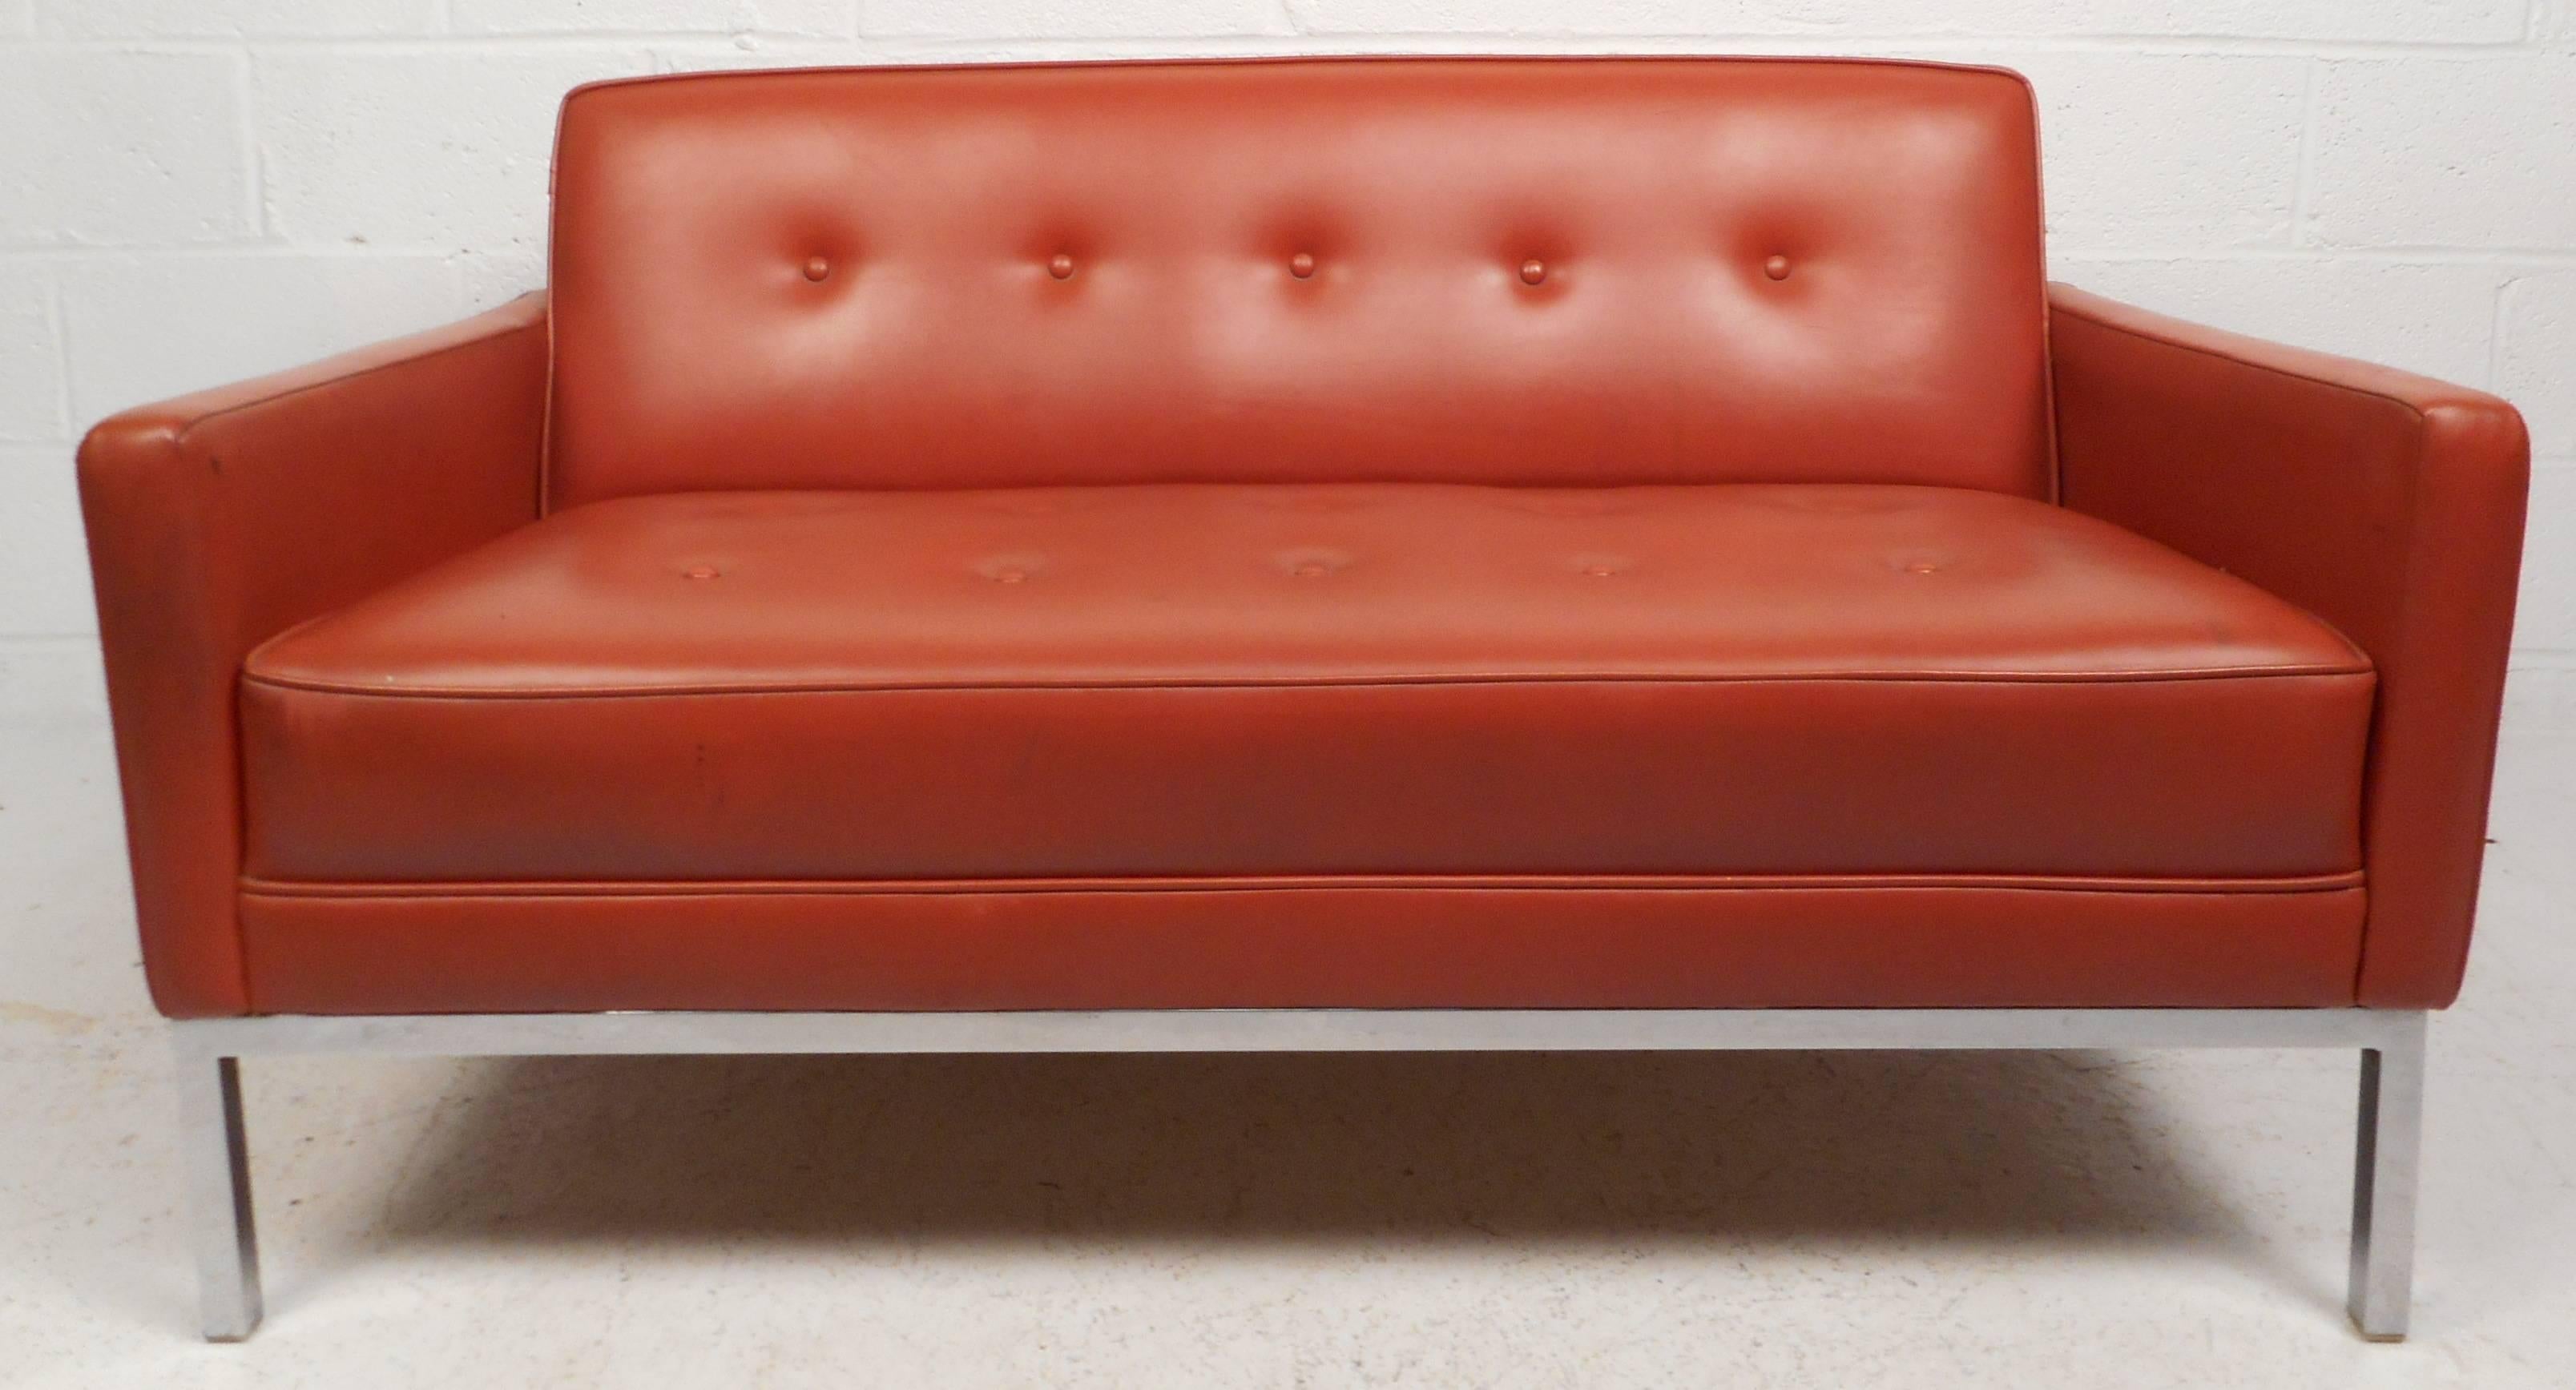 This elegant Mid-Century sofa features tufted vinyl upholstery and chrome legs. The stylish blood orange color and slanted backrest add to the allure of this piece. The versatile size of this love seat offers the ability to be used as a small sofa